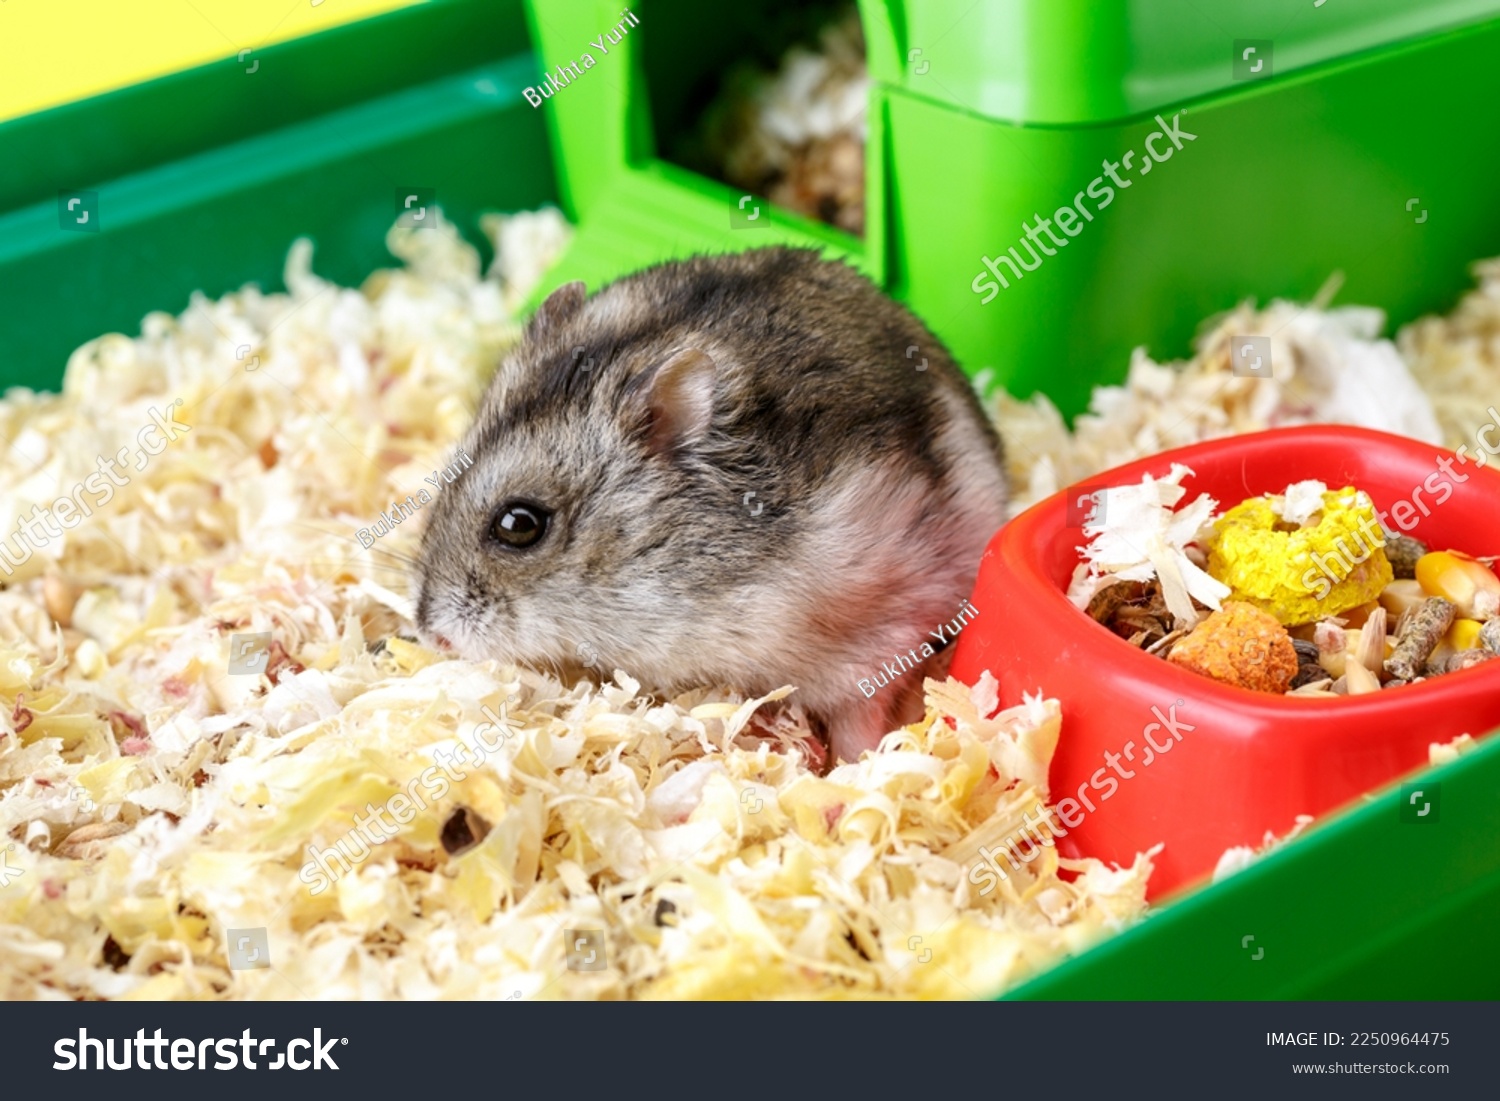 Dwarf gray hamster. Little house.Cute baby hamster, standing facing front.hamster eating food #2250964475